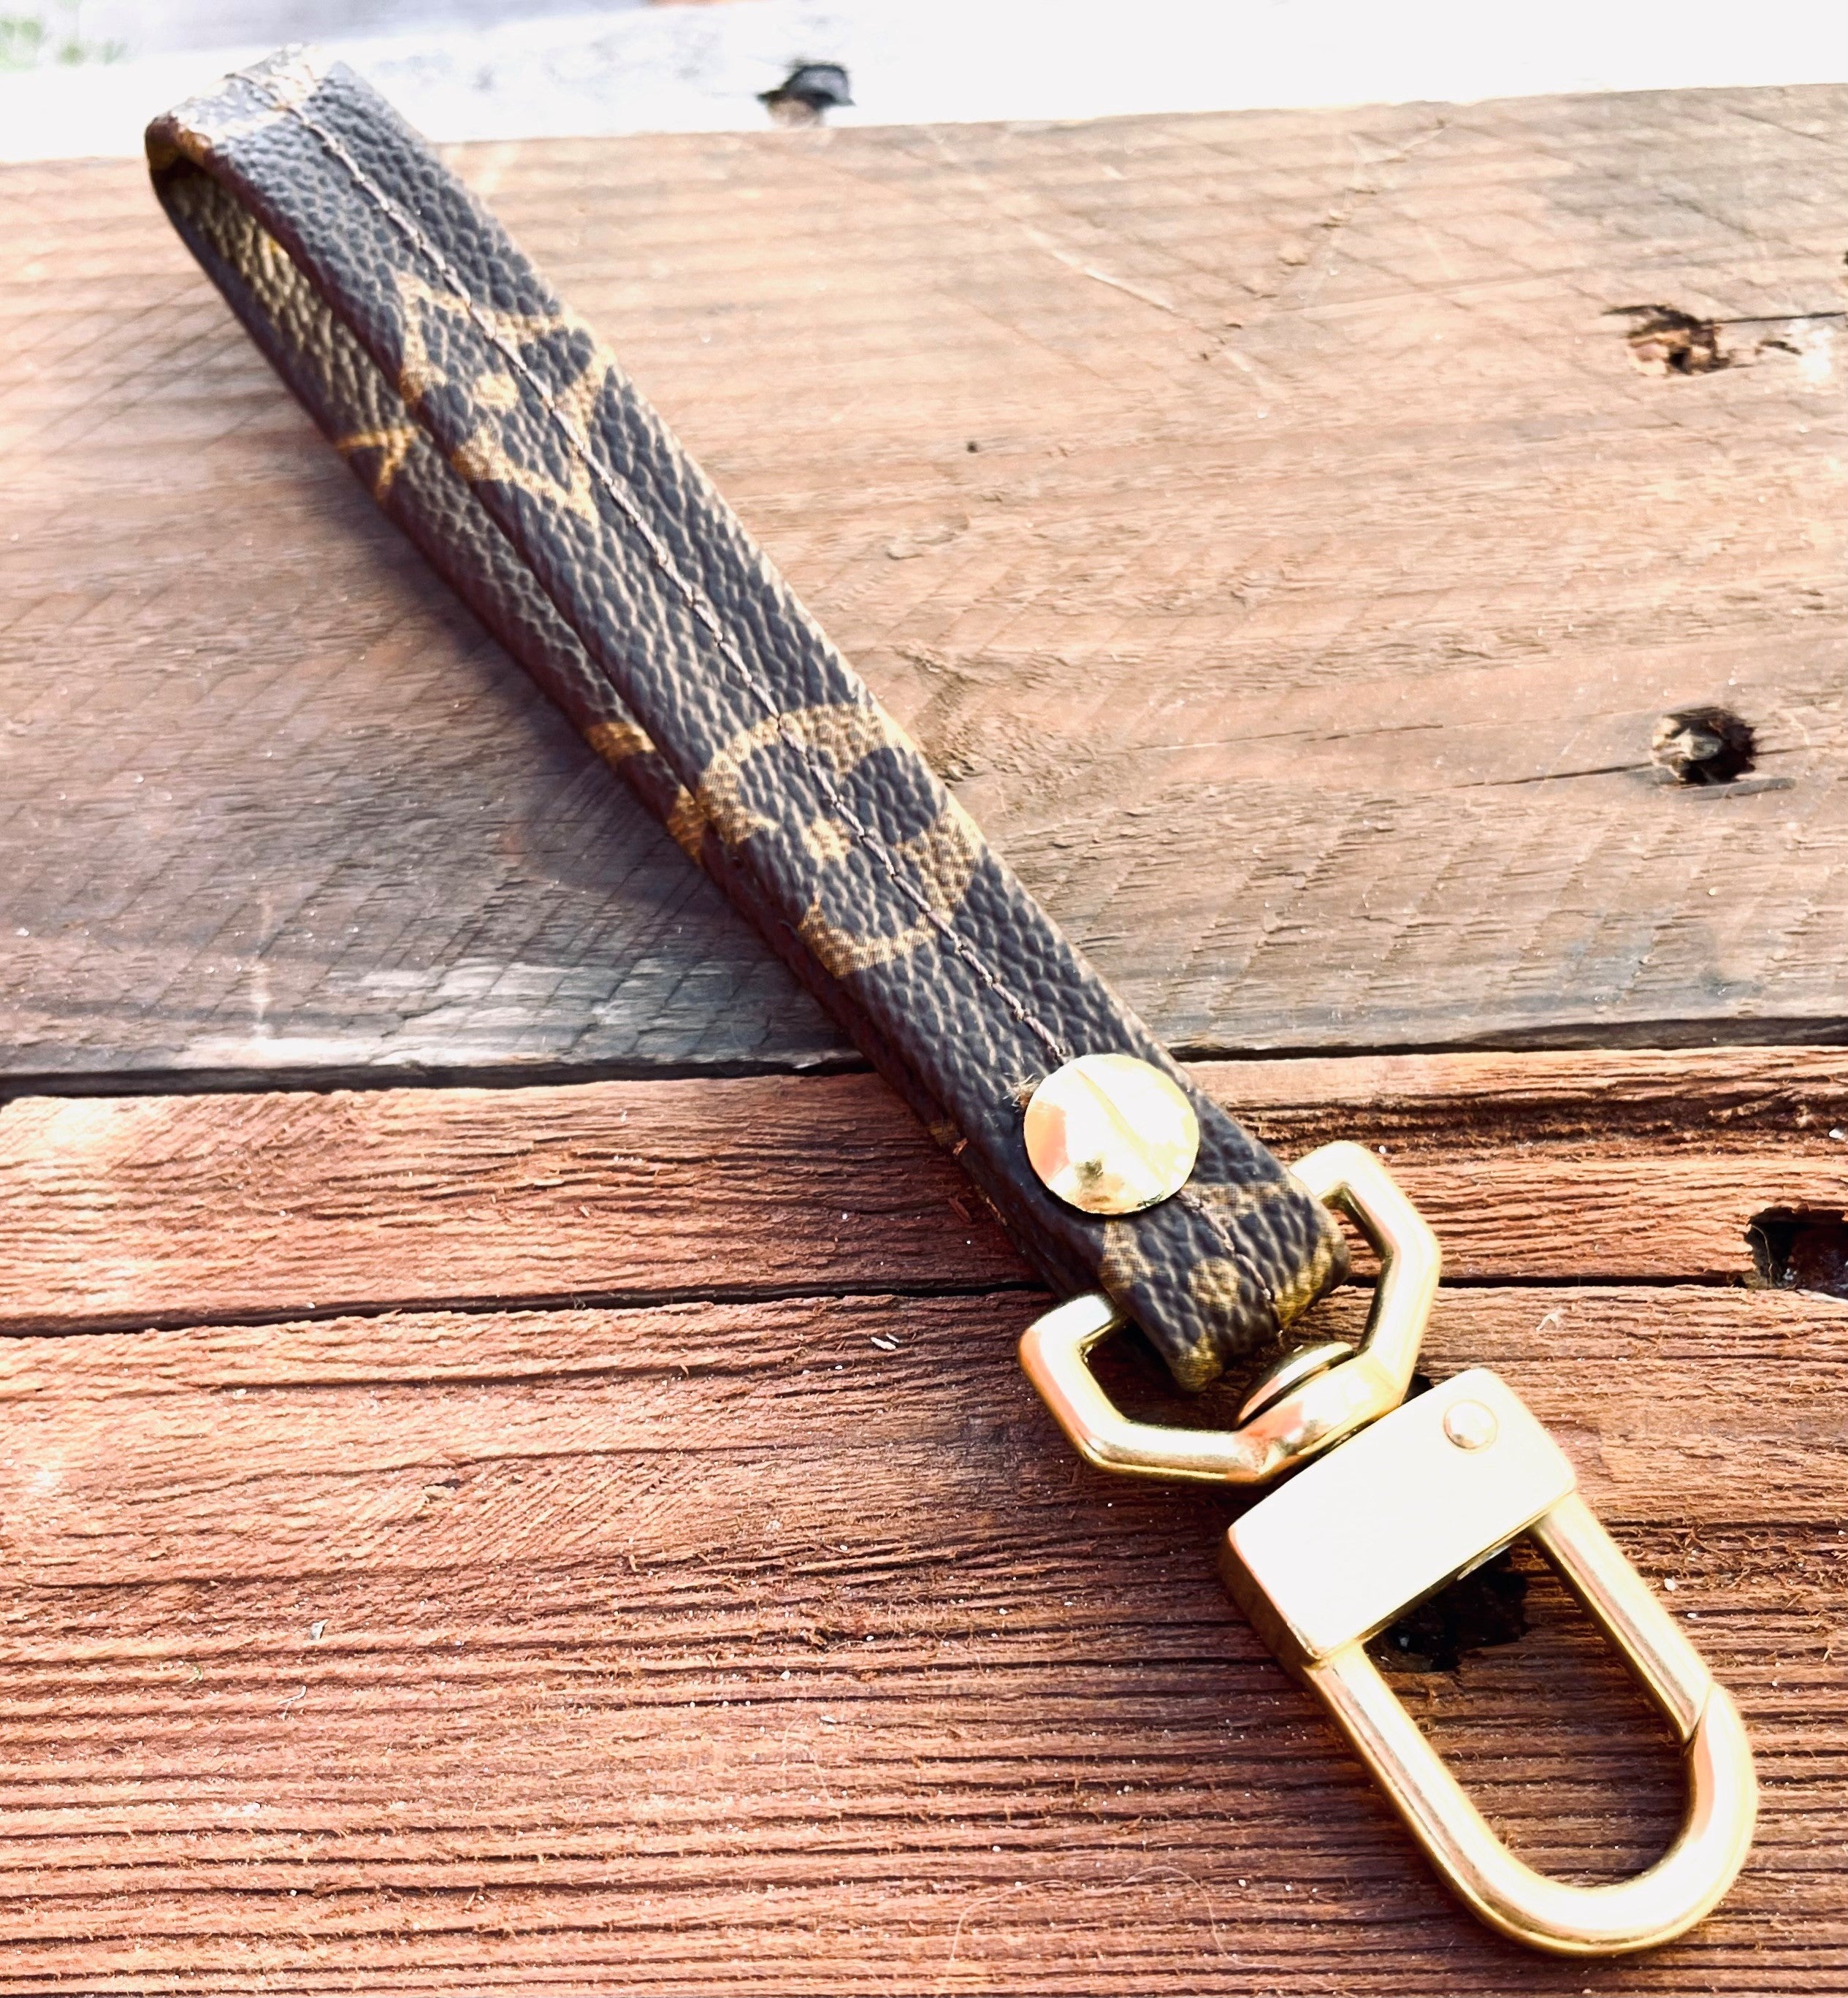 Louis Vuitton Upcycled Key Chain